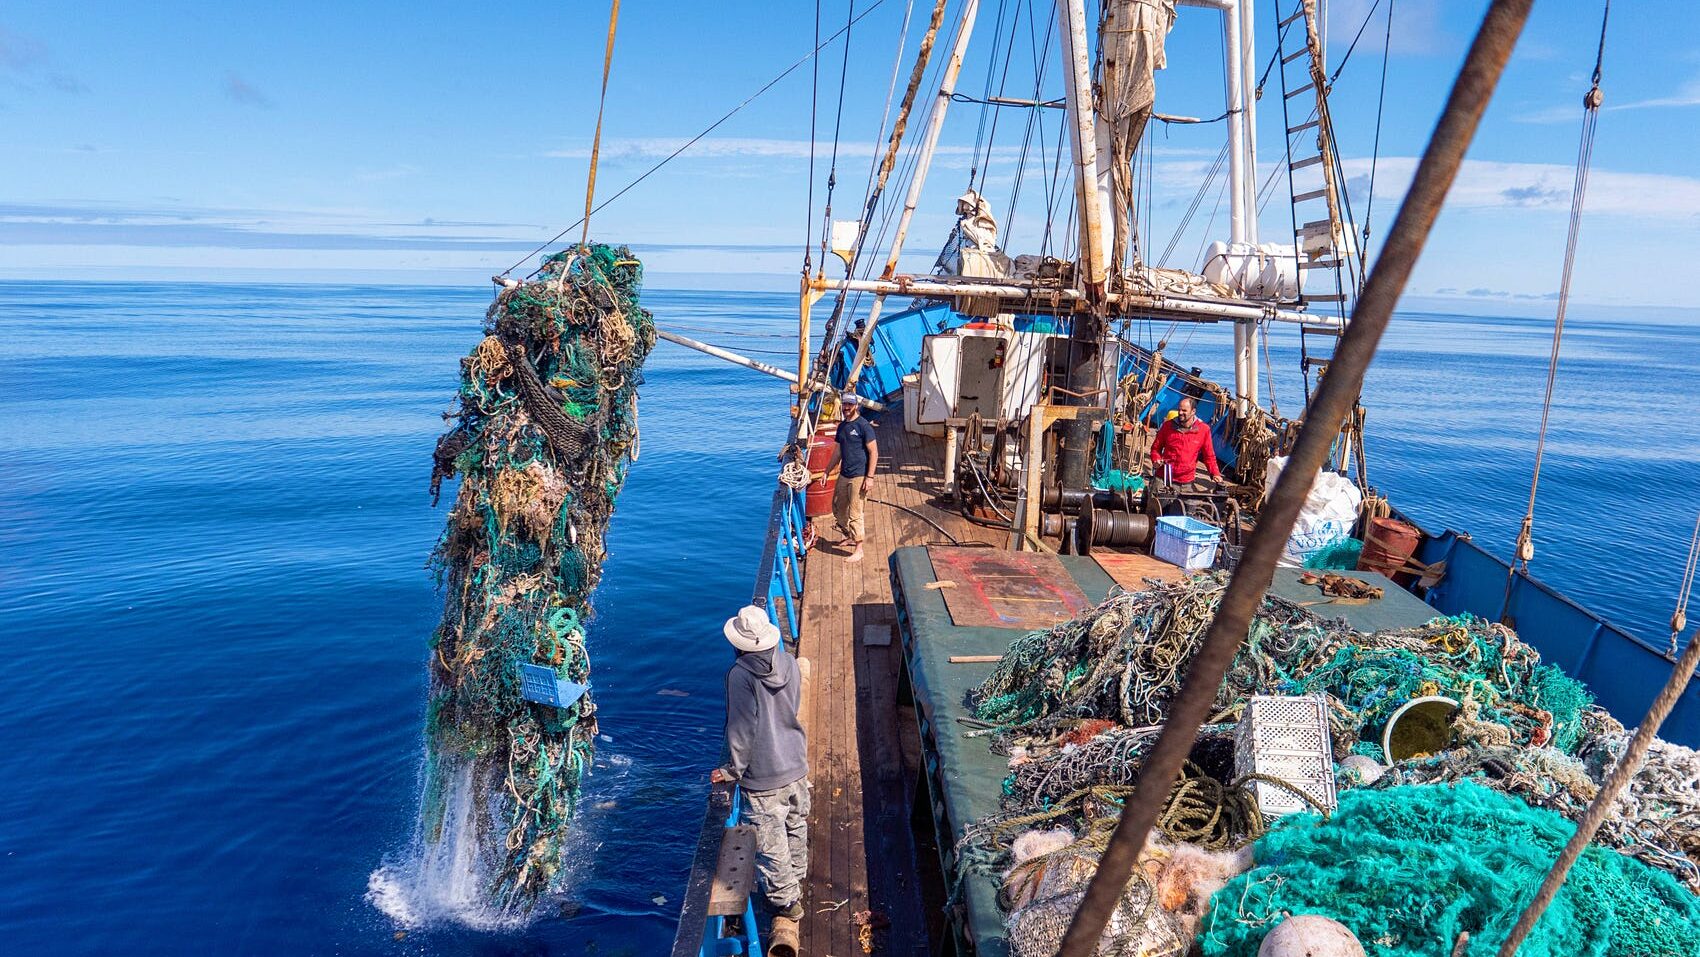 Record Amount of Plastic Recovered from the Great Pacific Garbage Patch